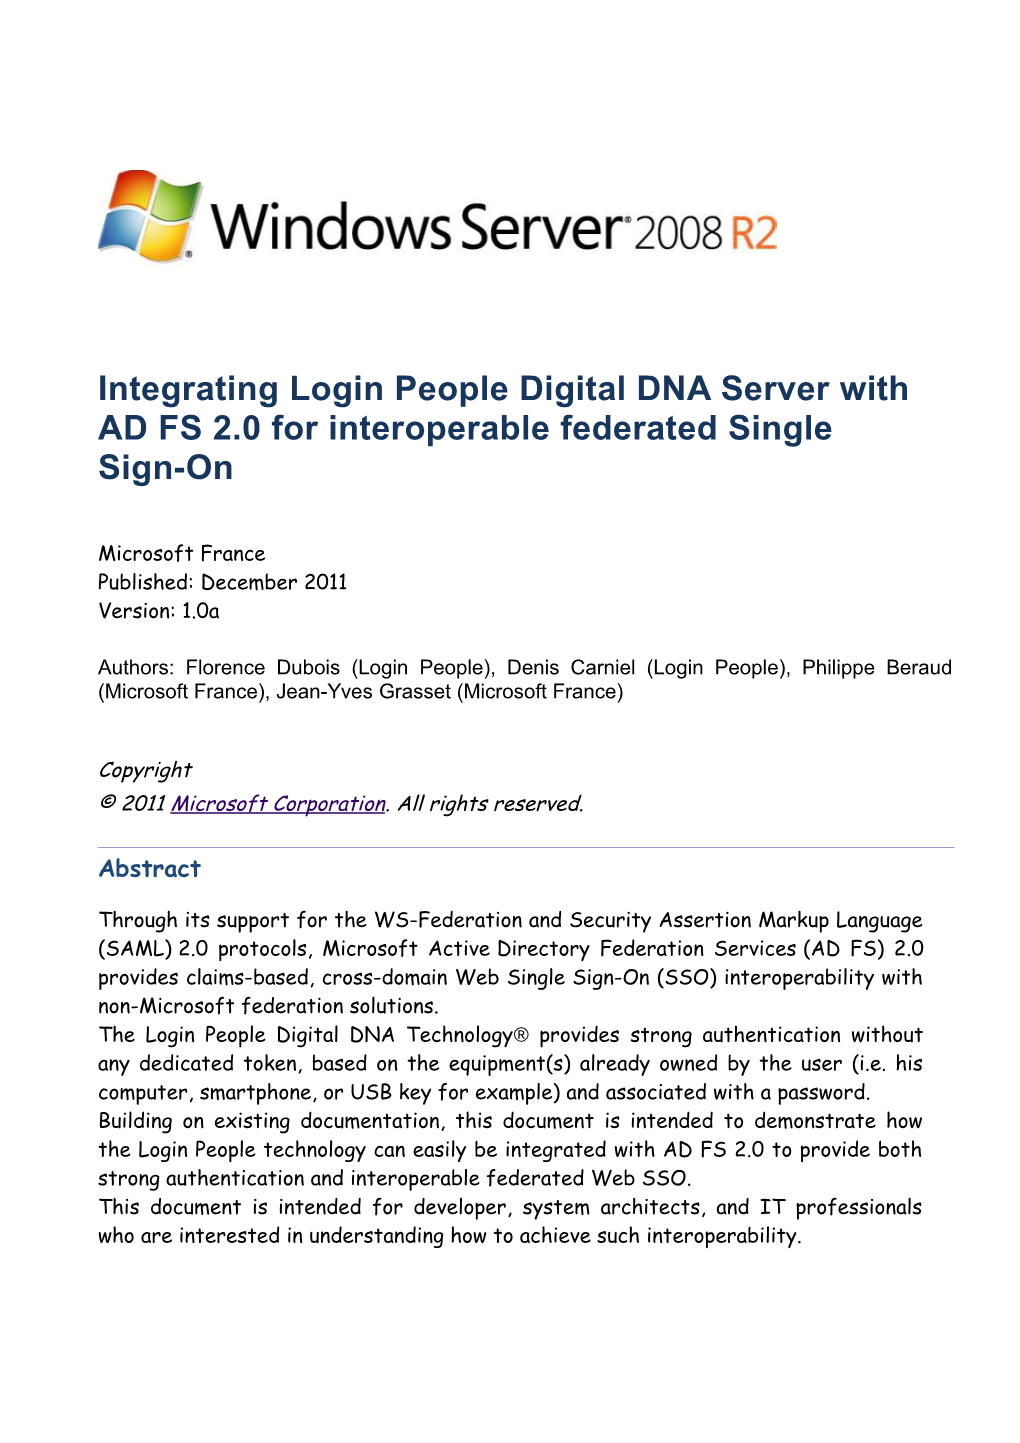 Integrating Login People Digital DNA Server with AD FS 2.0 for Interoperable Federated